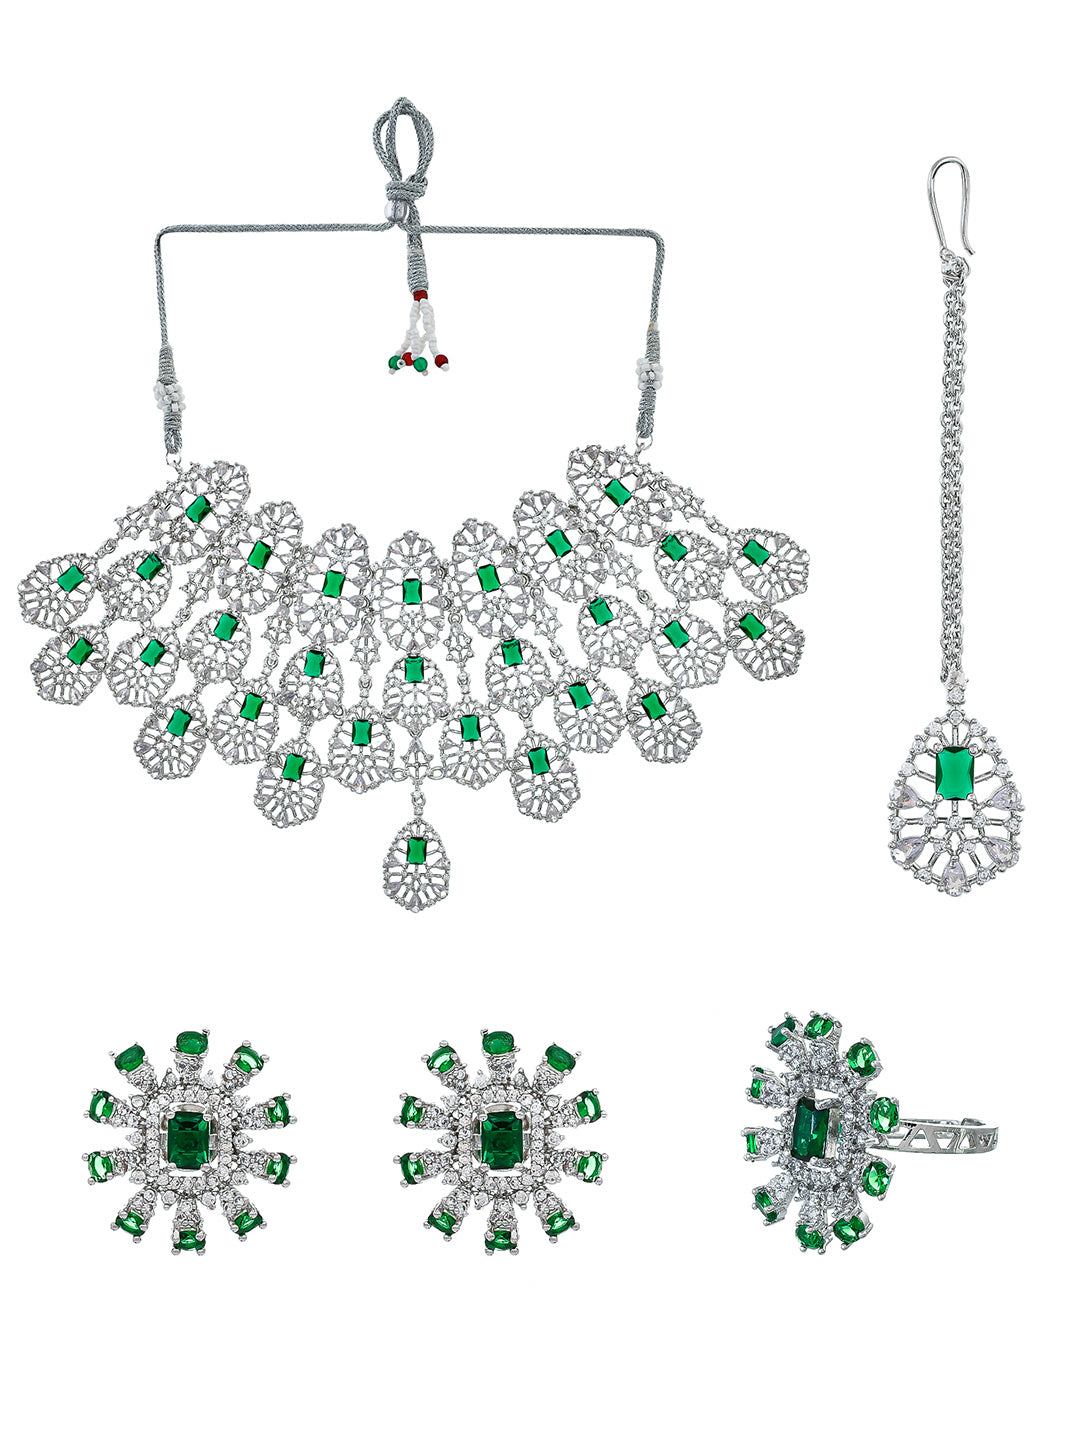 This stunning American Diamond heavy jewellery set with tikkka is the perfect accessory for any woman, bride or girl. With its intricate design and high-quality materials, it will add a touch of elegance and glamour to any outfit. Elevate your style with this beautiful set.